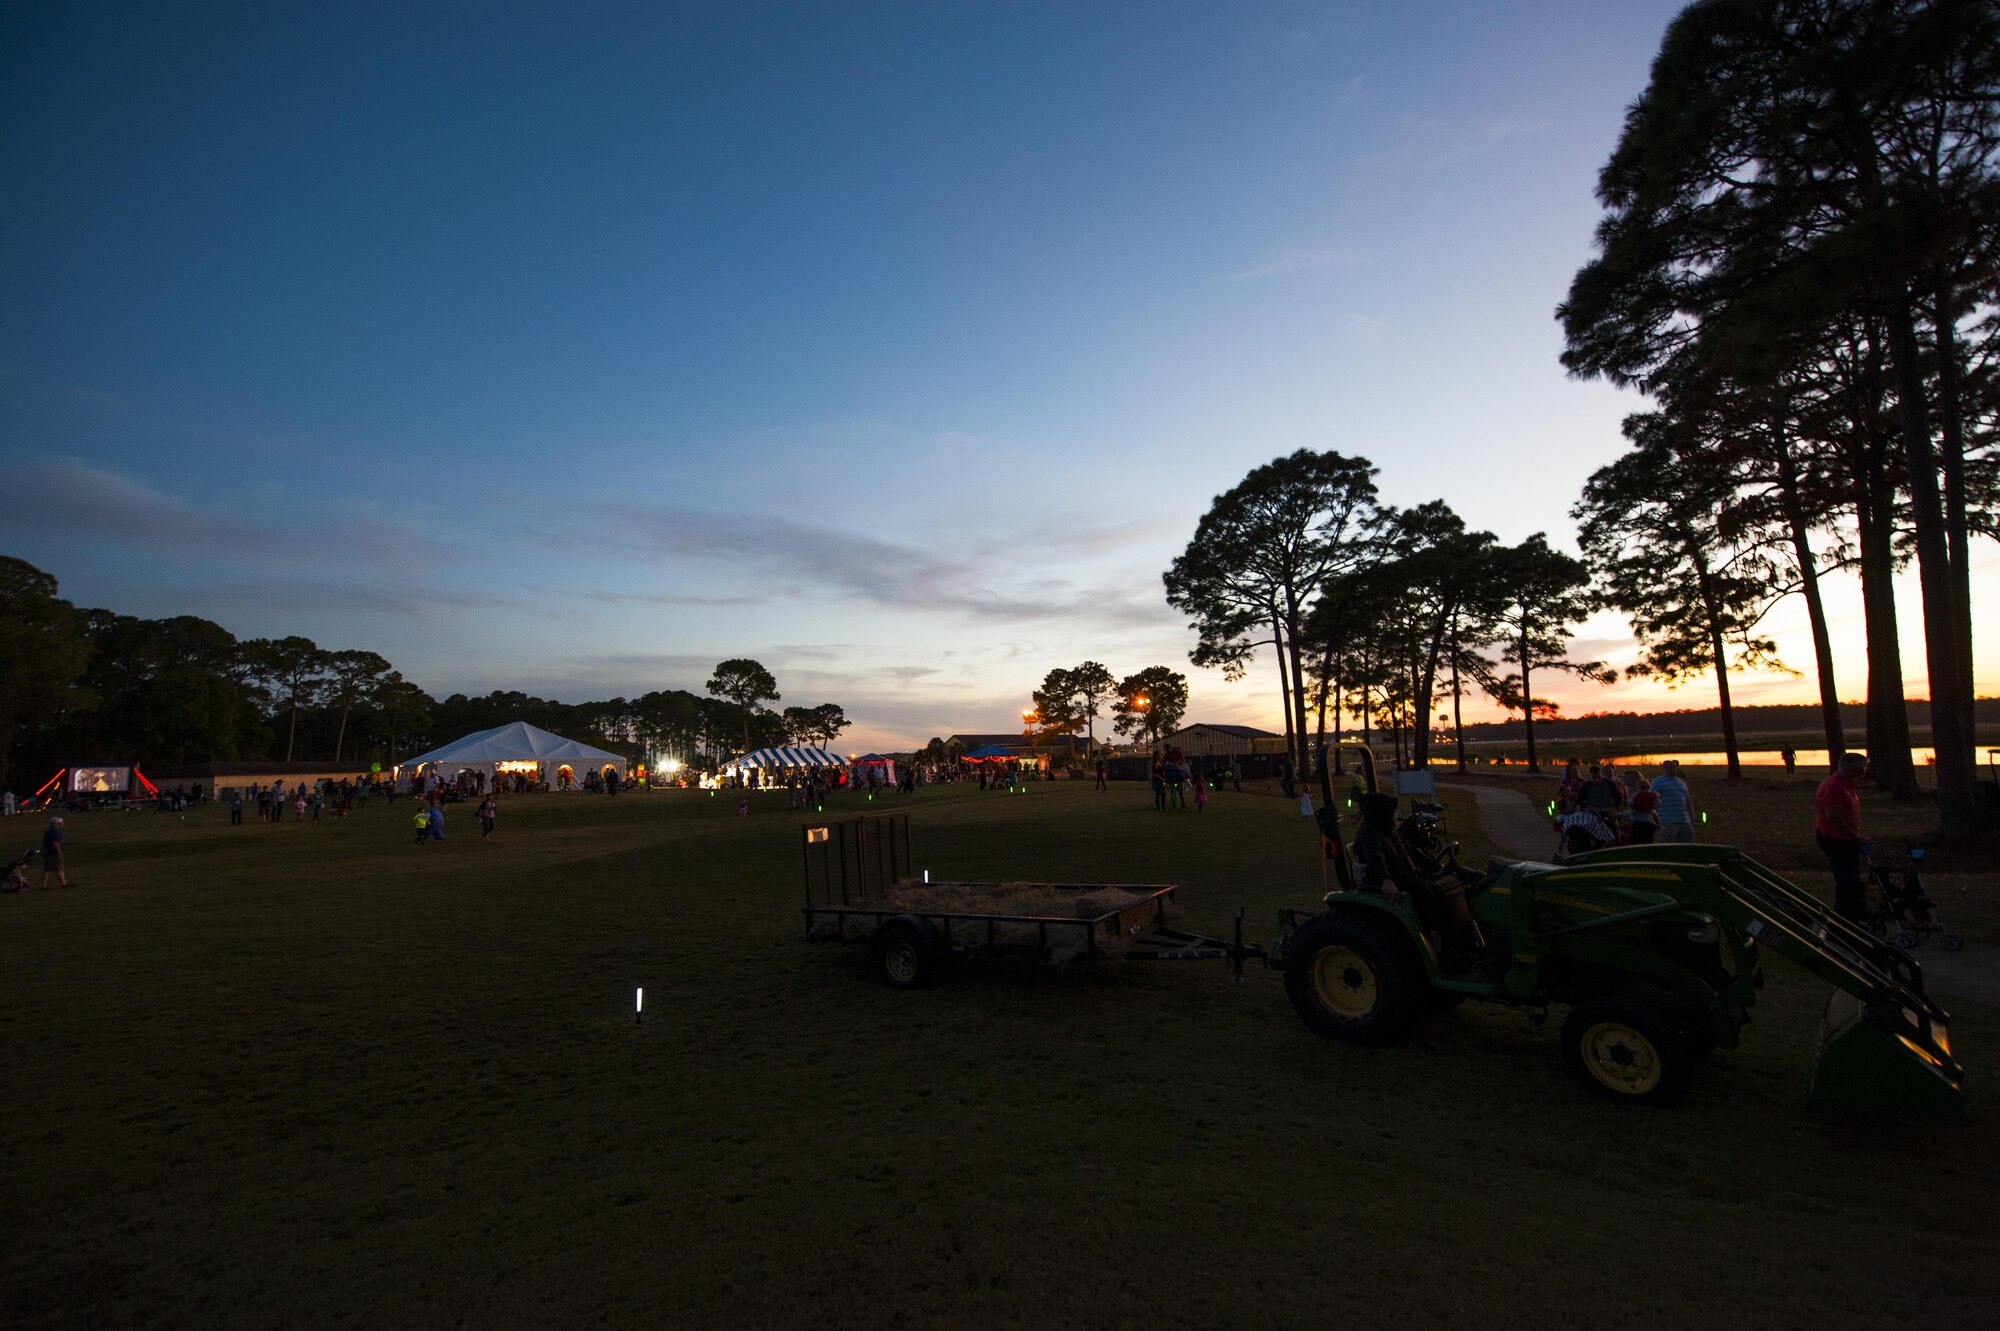 The sun sets during the Haunted Lakes Fall Festival at Gator Lakes Golf Course on Hurlburt Field, Fla., Oct. 28, 2016.  The festival was a free event hosted by the 1st Special Operations Force Support Squadron with complimentary food and fun for kids of all ages that included haunted hay rides, costume contests, games and a movie. (U.S. Air Force photo by Airman 1st Class Joseph Pick)